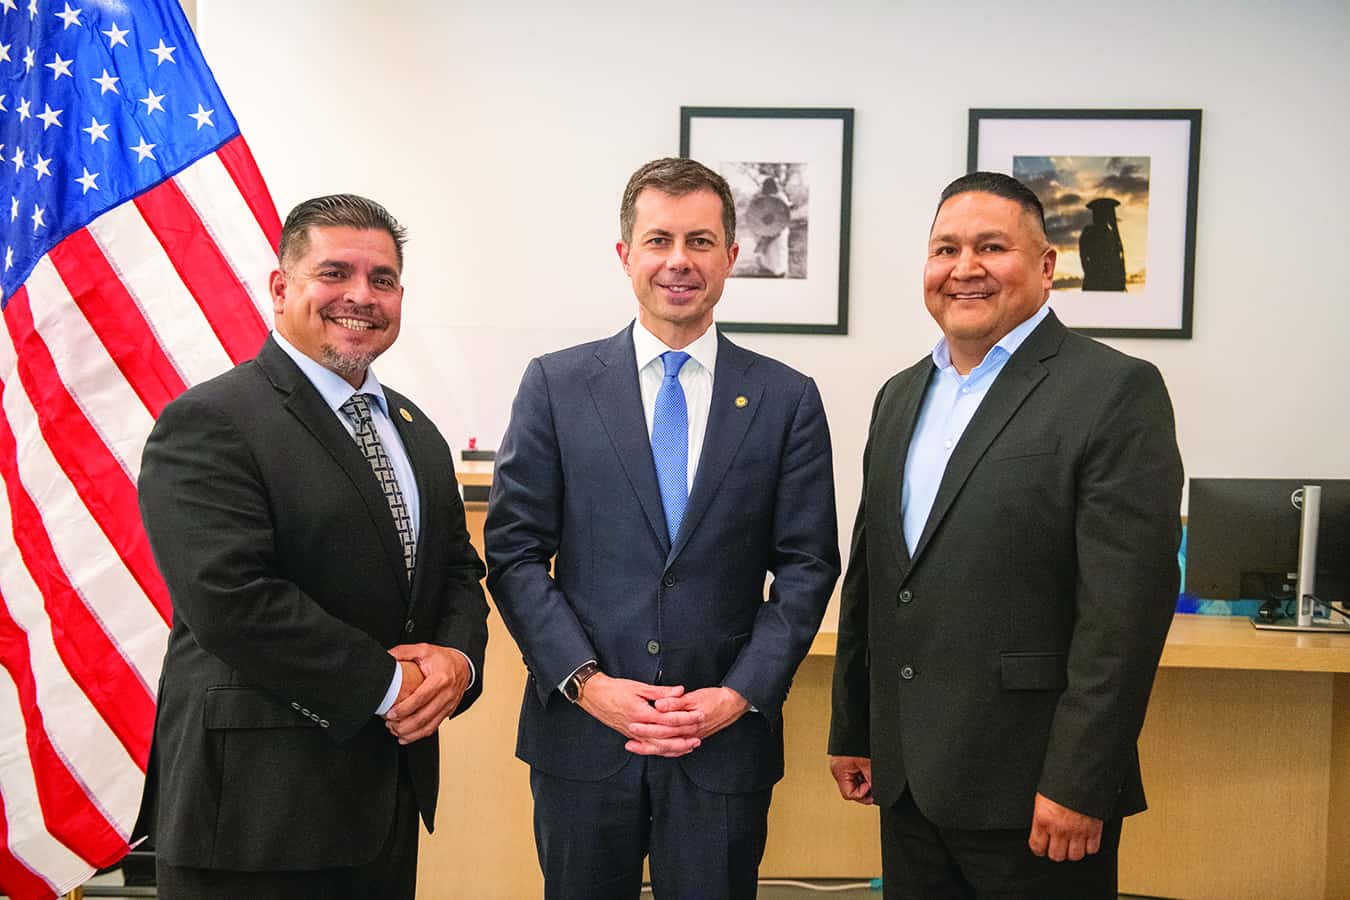 Transportation Secretary Buttigieg Meets with Leadership from Four Sibling Tribes at GRIC